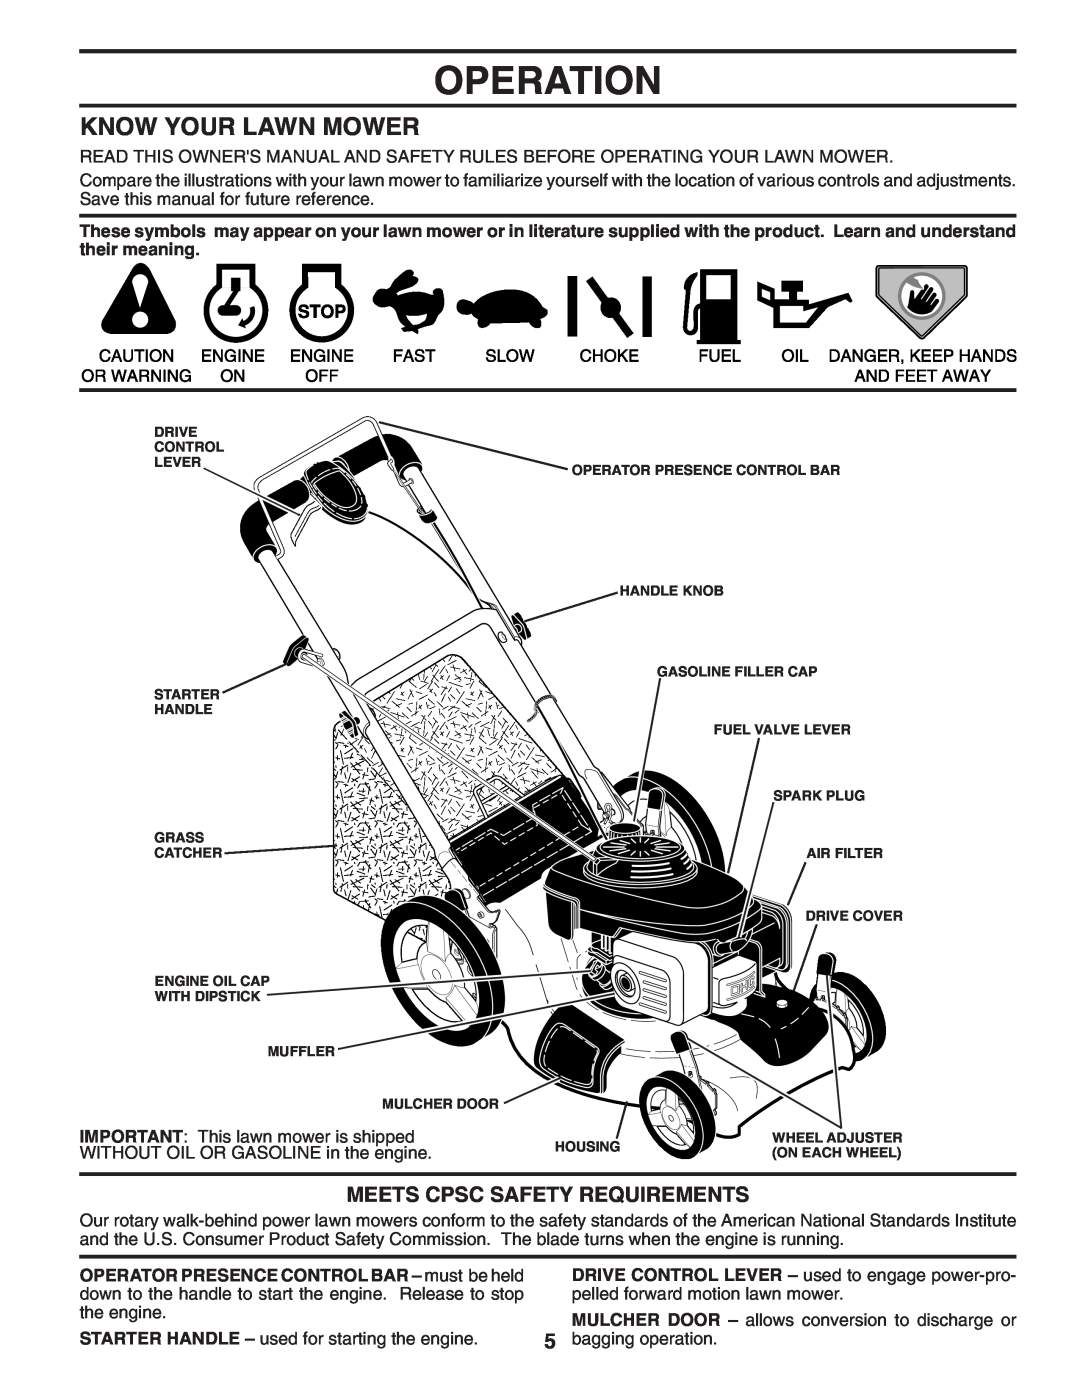 Husqvarna 7021F manual Operation, Know Your Lawn Mower, Meets Cpsc Safety Requirements 